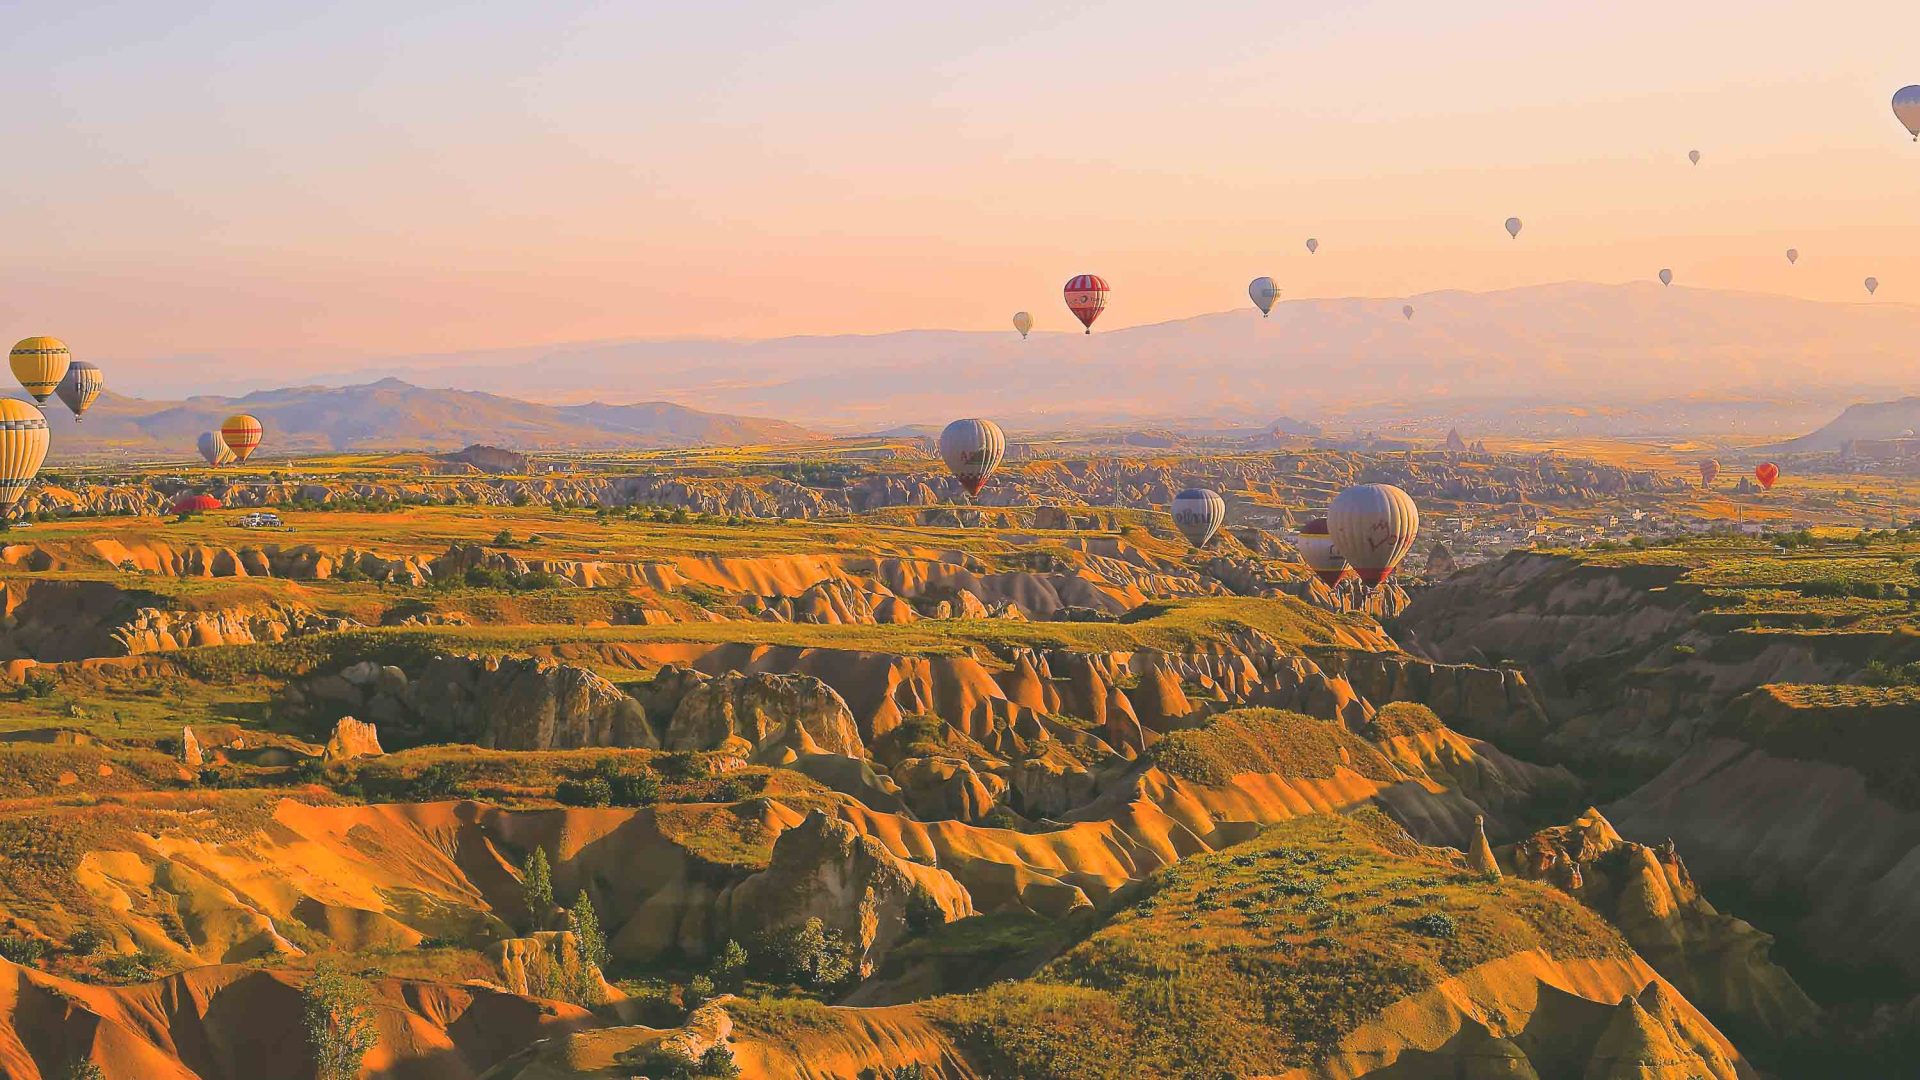 Hot air balloons above rock formations.